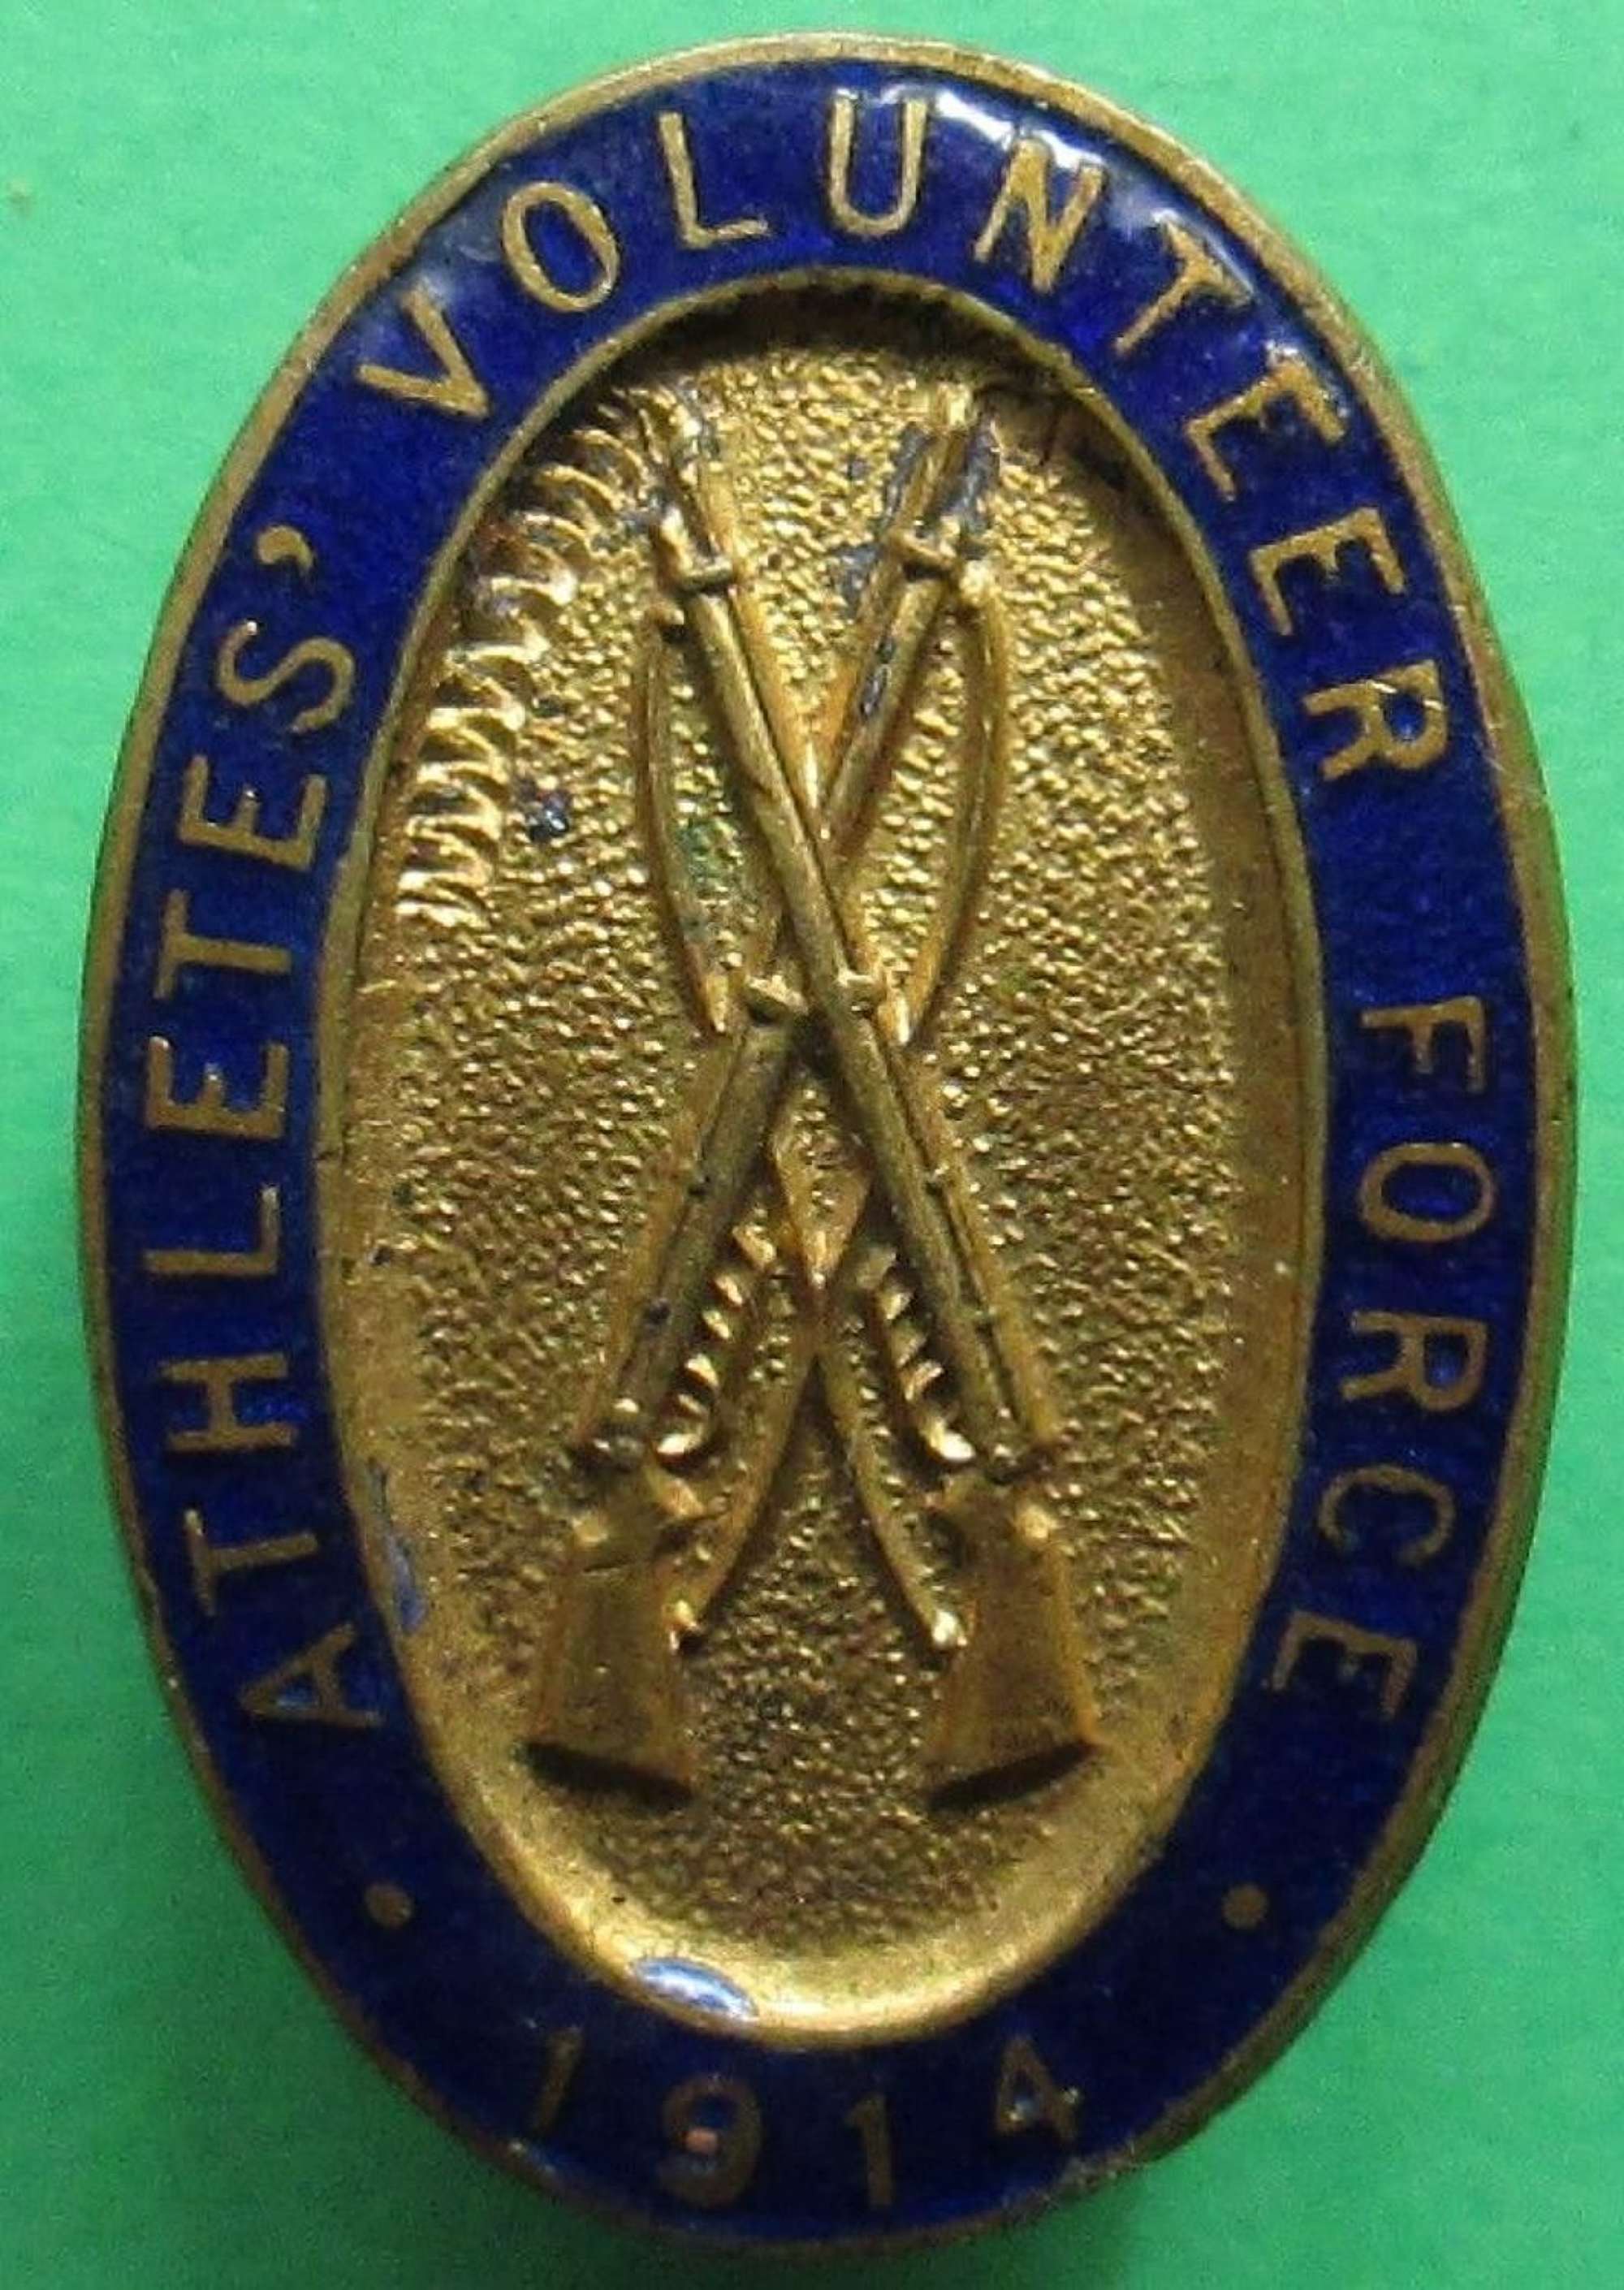 AN ATHLETES VOLUNTEER FORCE BADGE DATED 1914